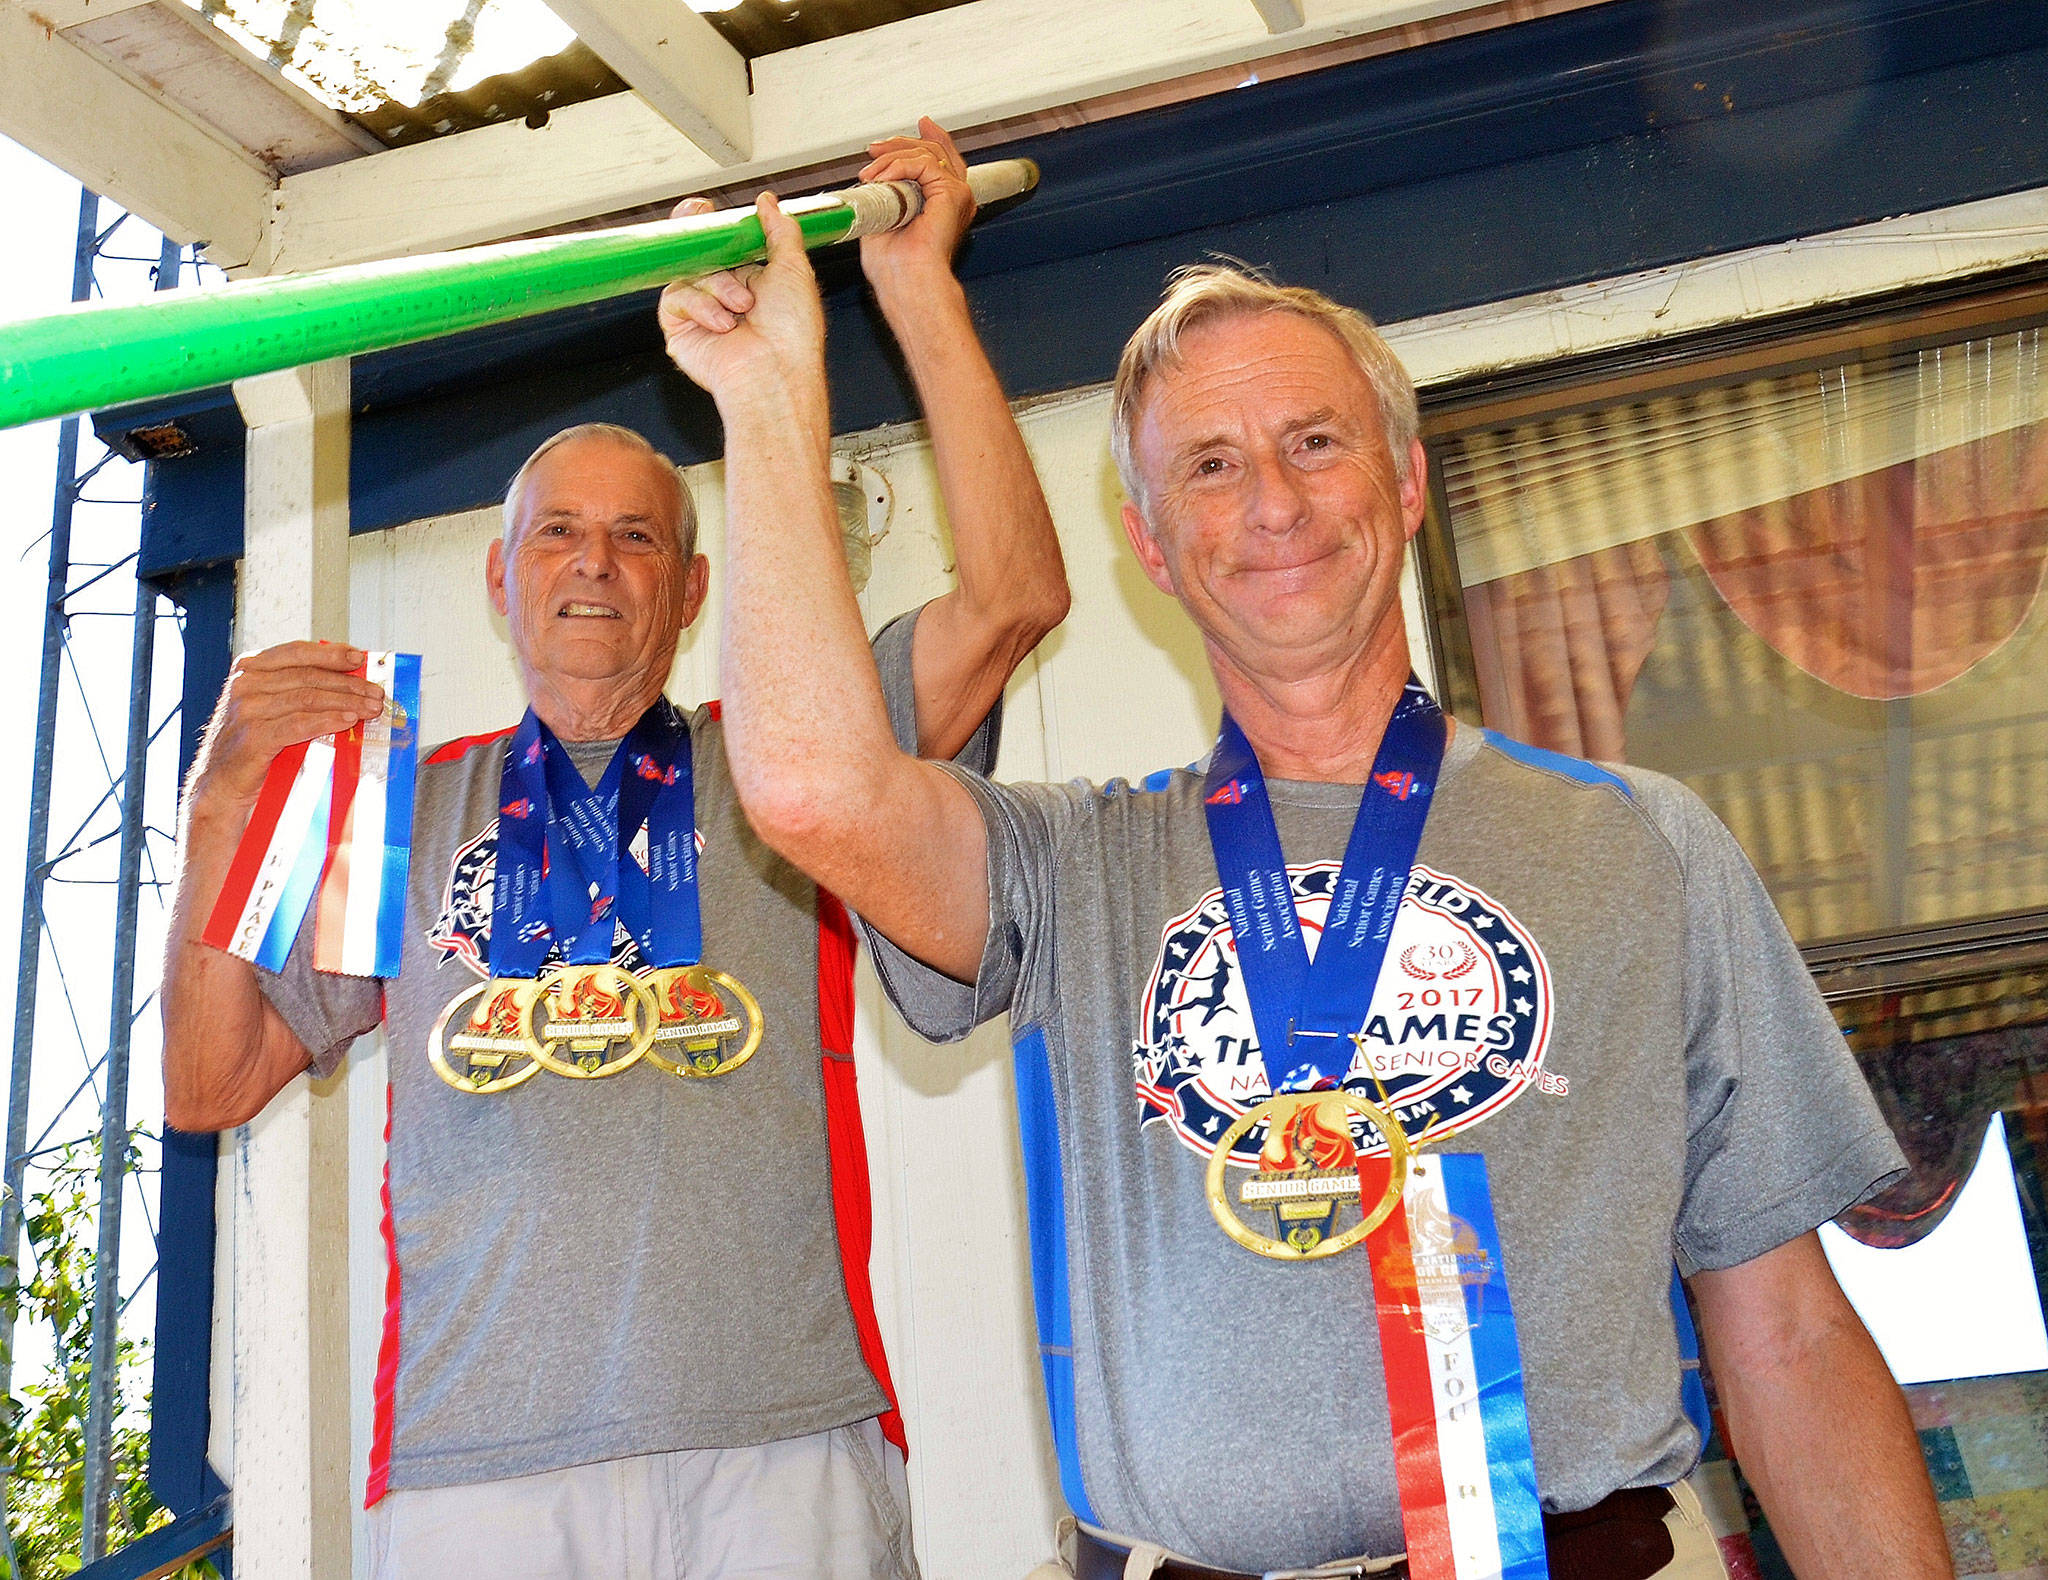 Chuck (left) and Phil Milliman racked up gold medals in the pole vault at the Birmingham 2017 National Senior Games in Alabama earlier this month. Photos courtesy of the Milliman family